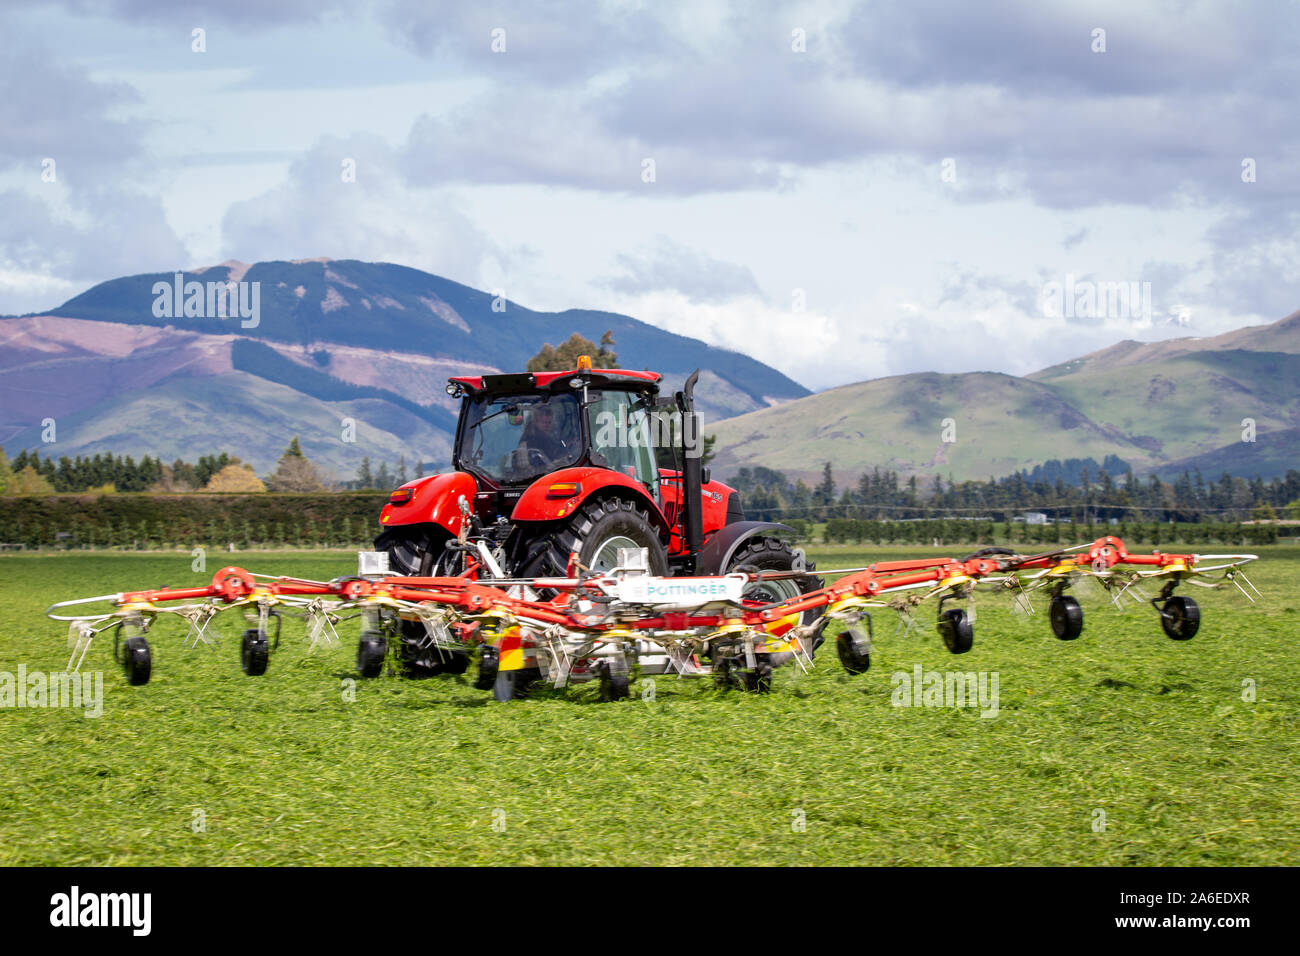 Sheffield, Canterbury, New Zealand, October 25 2019: A contractor rakes silage ready to be baled on a large farm in the Canterbury foothills Stock Photo